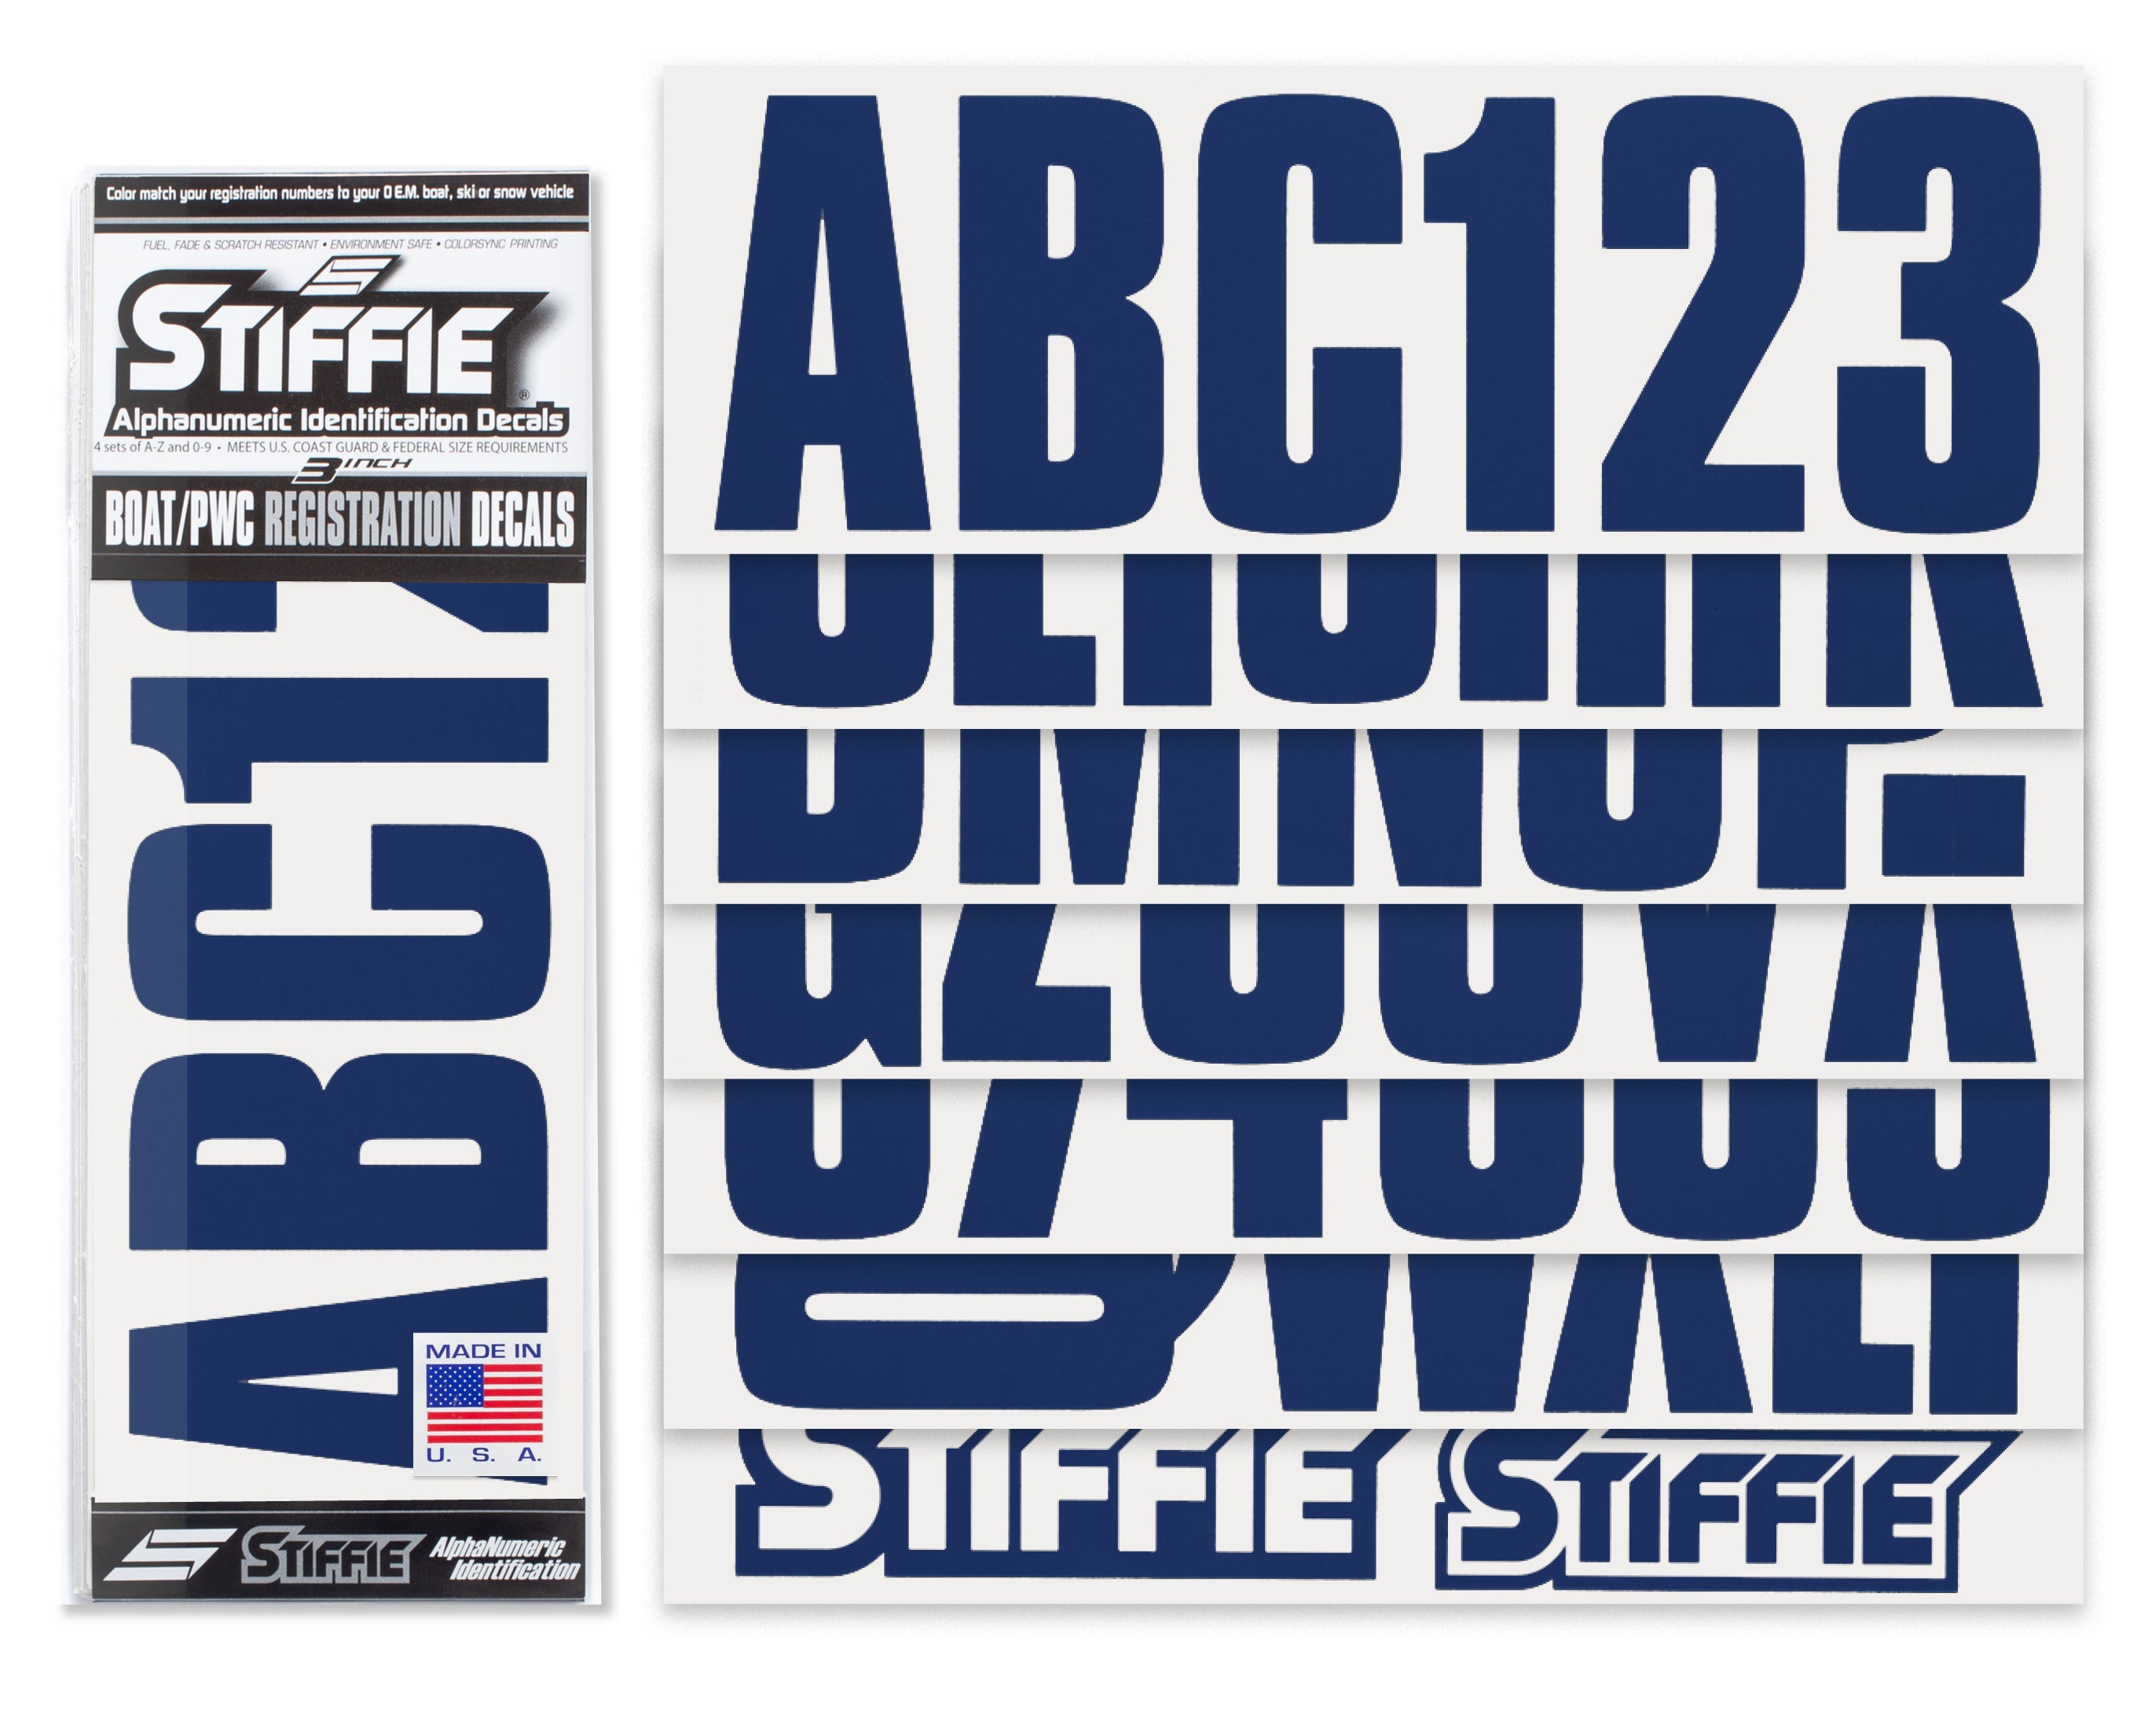 STIFFIE Uniline Navy 3" ID Kit Alpha-Numeric Registration Identification Numbers Stickers Decals for Boats & Personal Watercraft